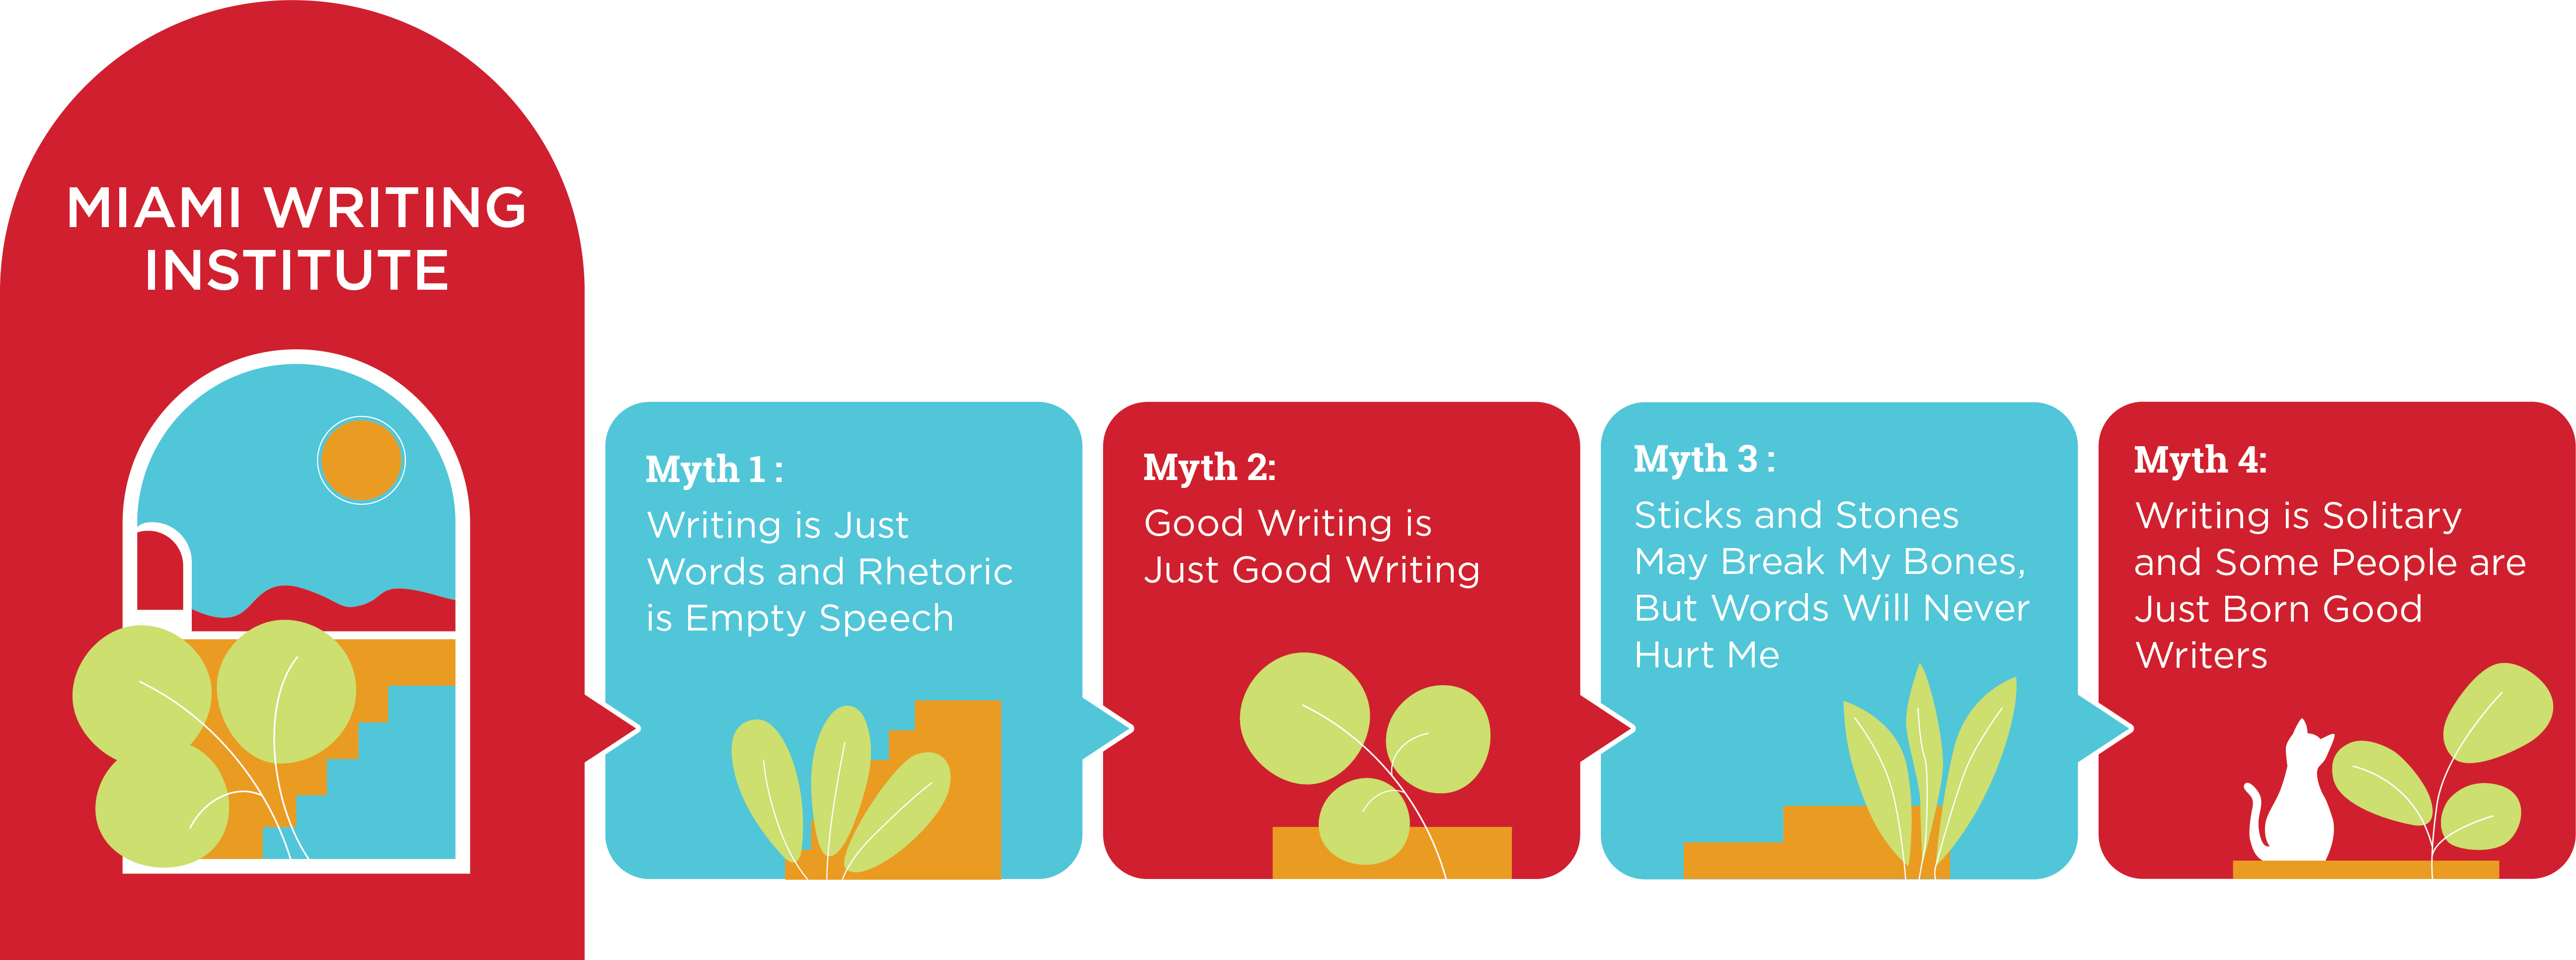 A colorful, mid-century themed graphic overviewing the myths of the Miami Writing Institute, including: Myth 1: Writing Is Just Words and Rhetoric is Empty Speech, Myth 2: Good Writing is Just Good Writing, Myth 3: Sticks and Stones May Break My Bones but Words Will Never Hurt Me, and Myth 4: Writing is Solitary and Some People are Just Born Good Writers.